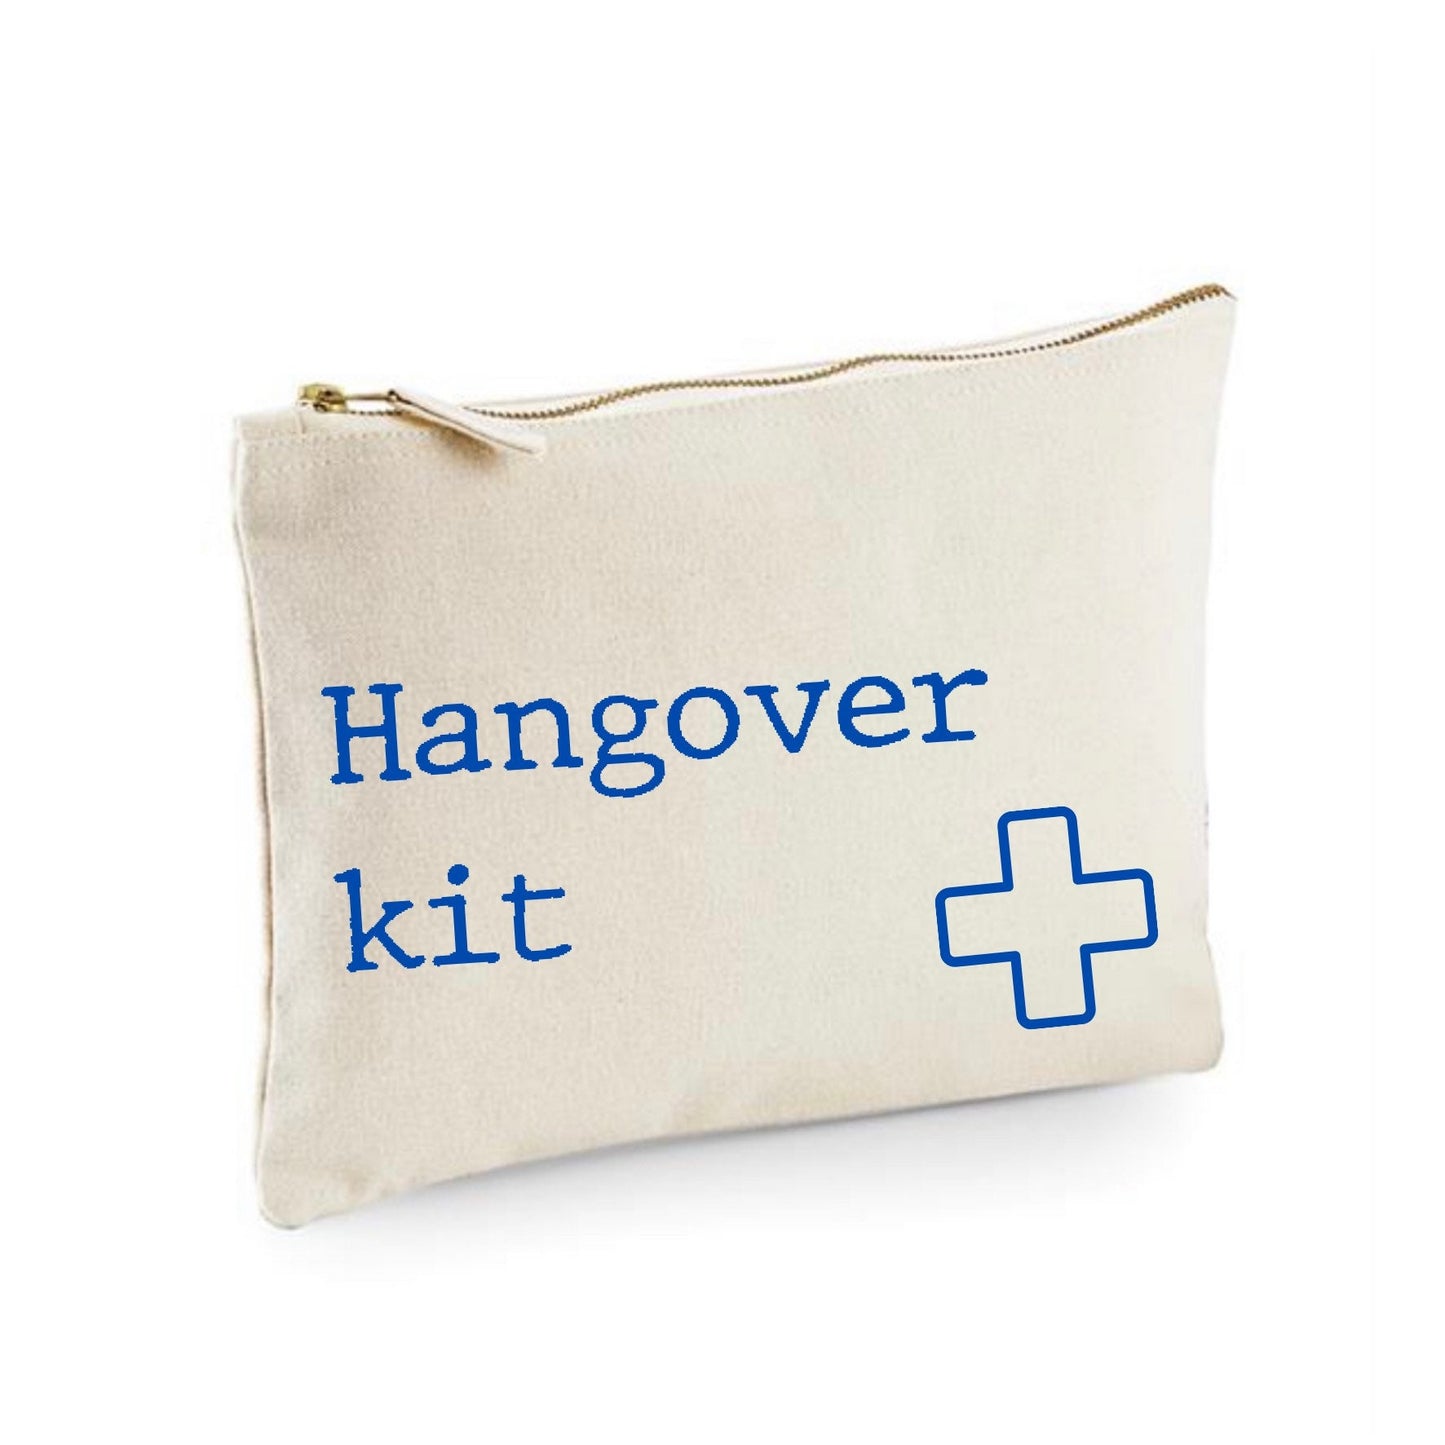 Hangover kit bag, bridal party hangover kit pouch, first aid bag, hen and stag do hangover kit, bachelorette hangover cure essentials